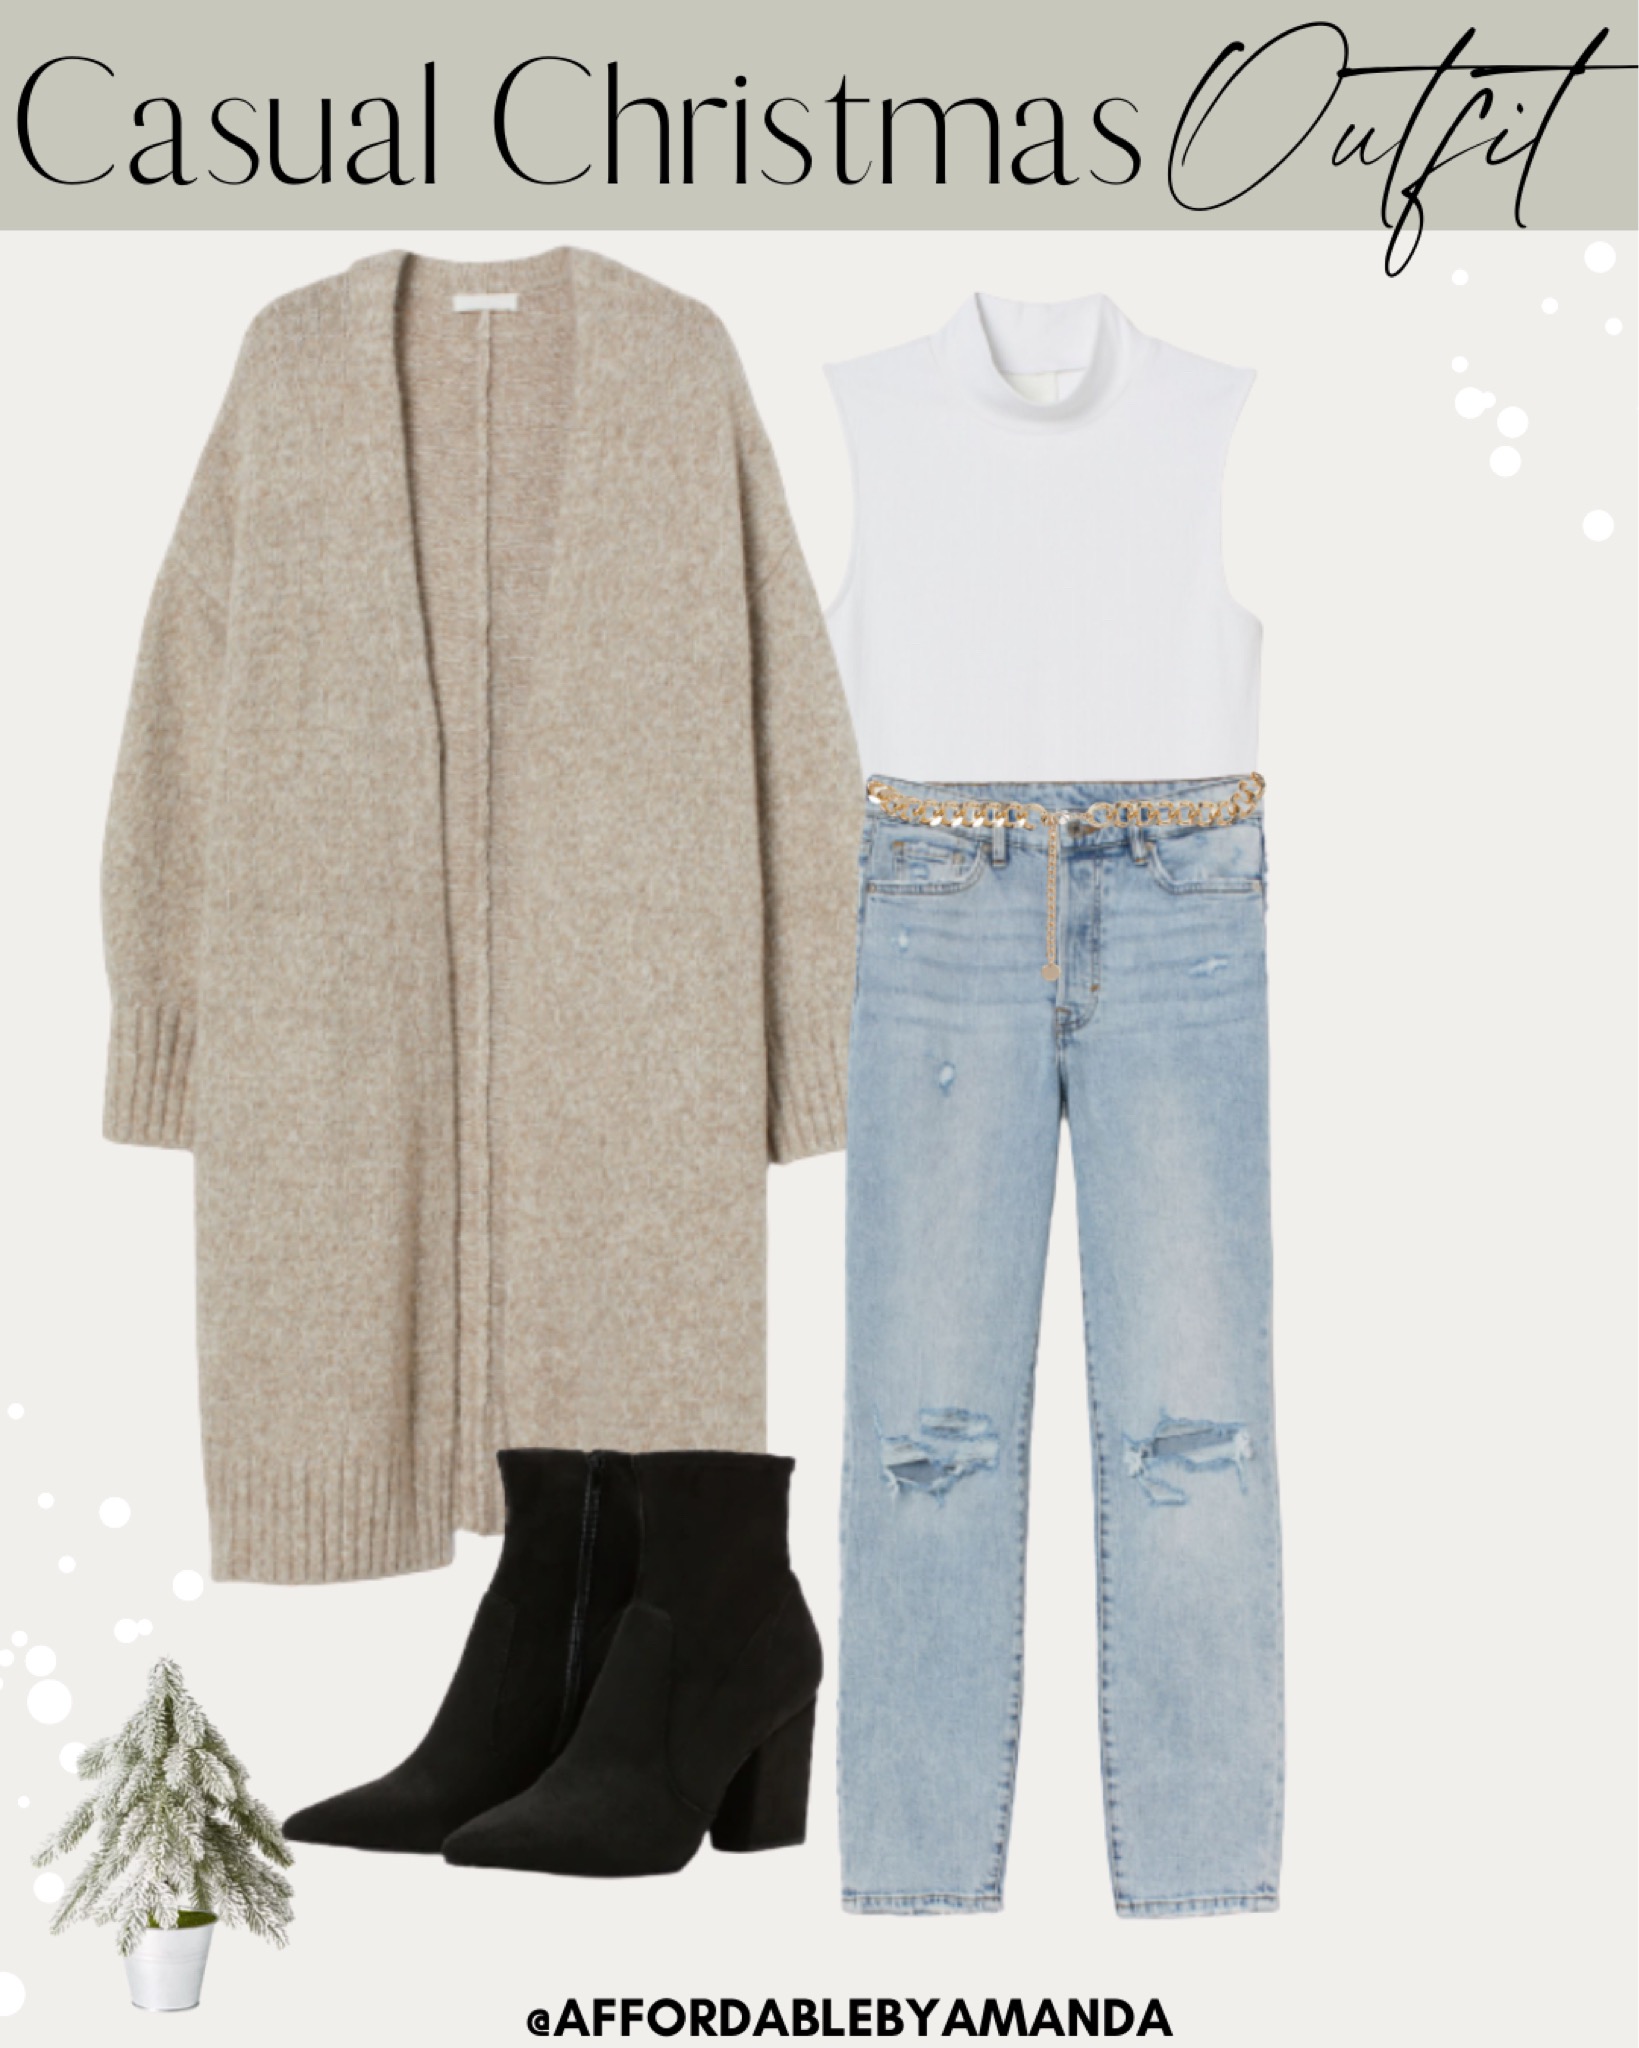 Long soft knit cardigan | Mom Jeans | Black Ankle Boots | Casual Christmas Outfit Idea 2020 | Affordable by Amanda